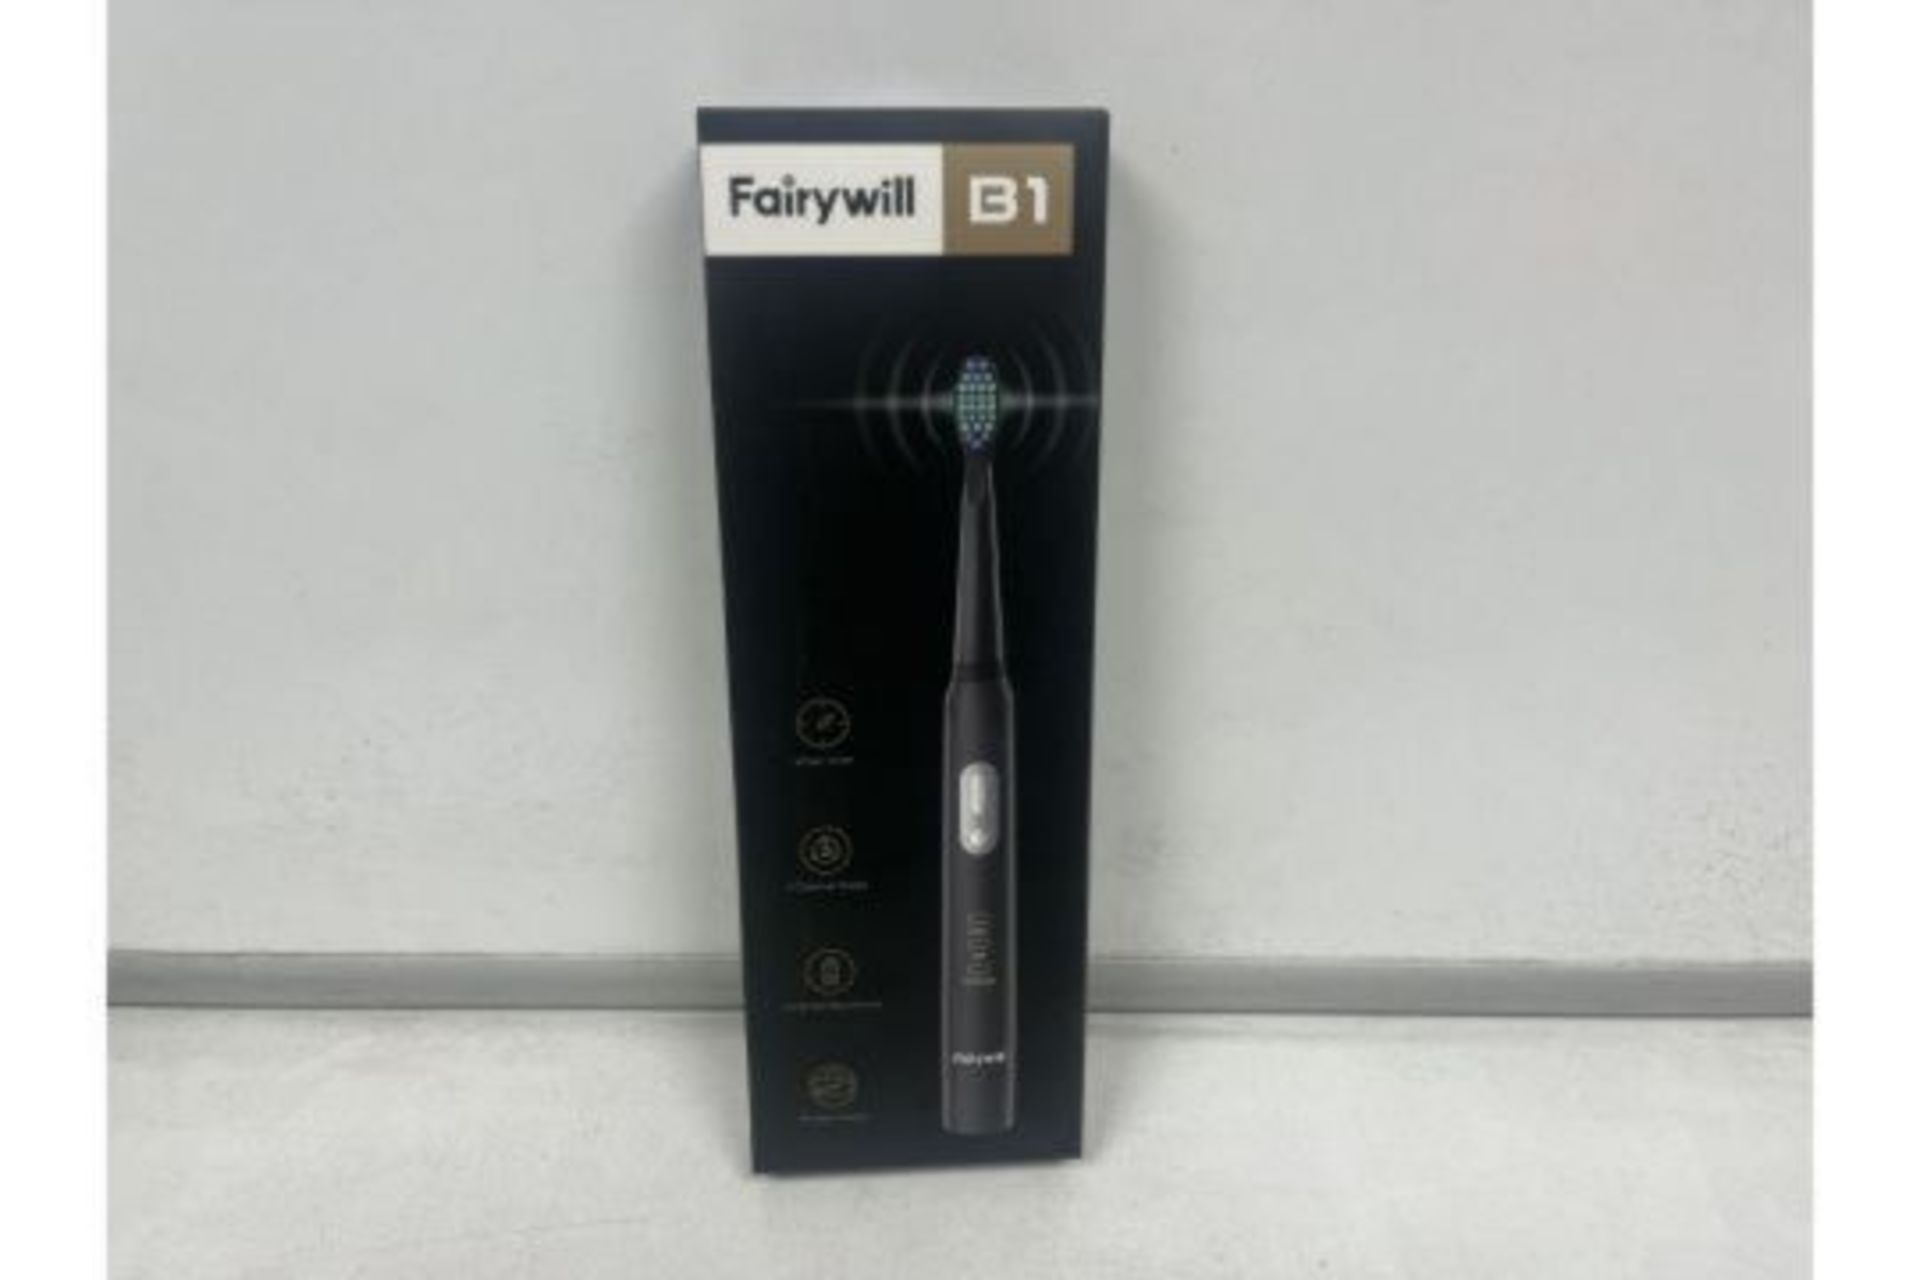 5 X BRAND NEW FAIRYWILL B1 ELECTRIC TOOTHBRUSH WITH SMART TIMES, 3 OPTIONAL MODES, LAND STANBY